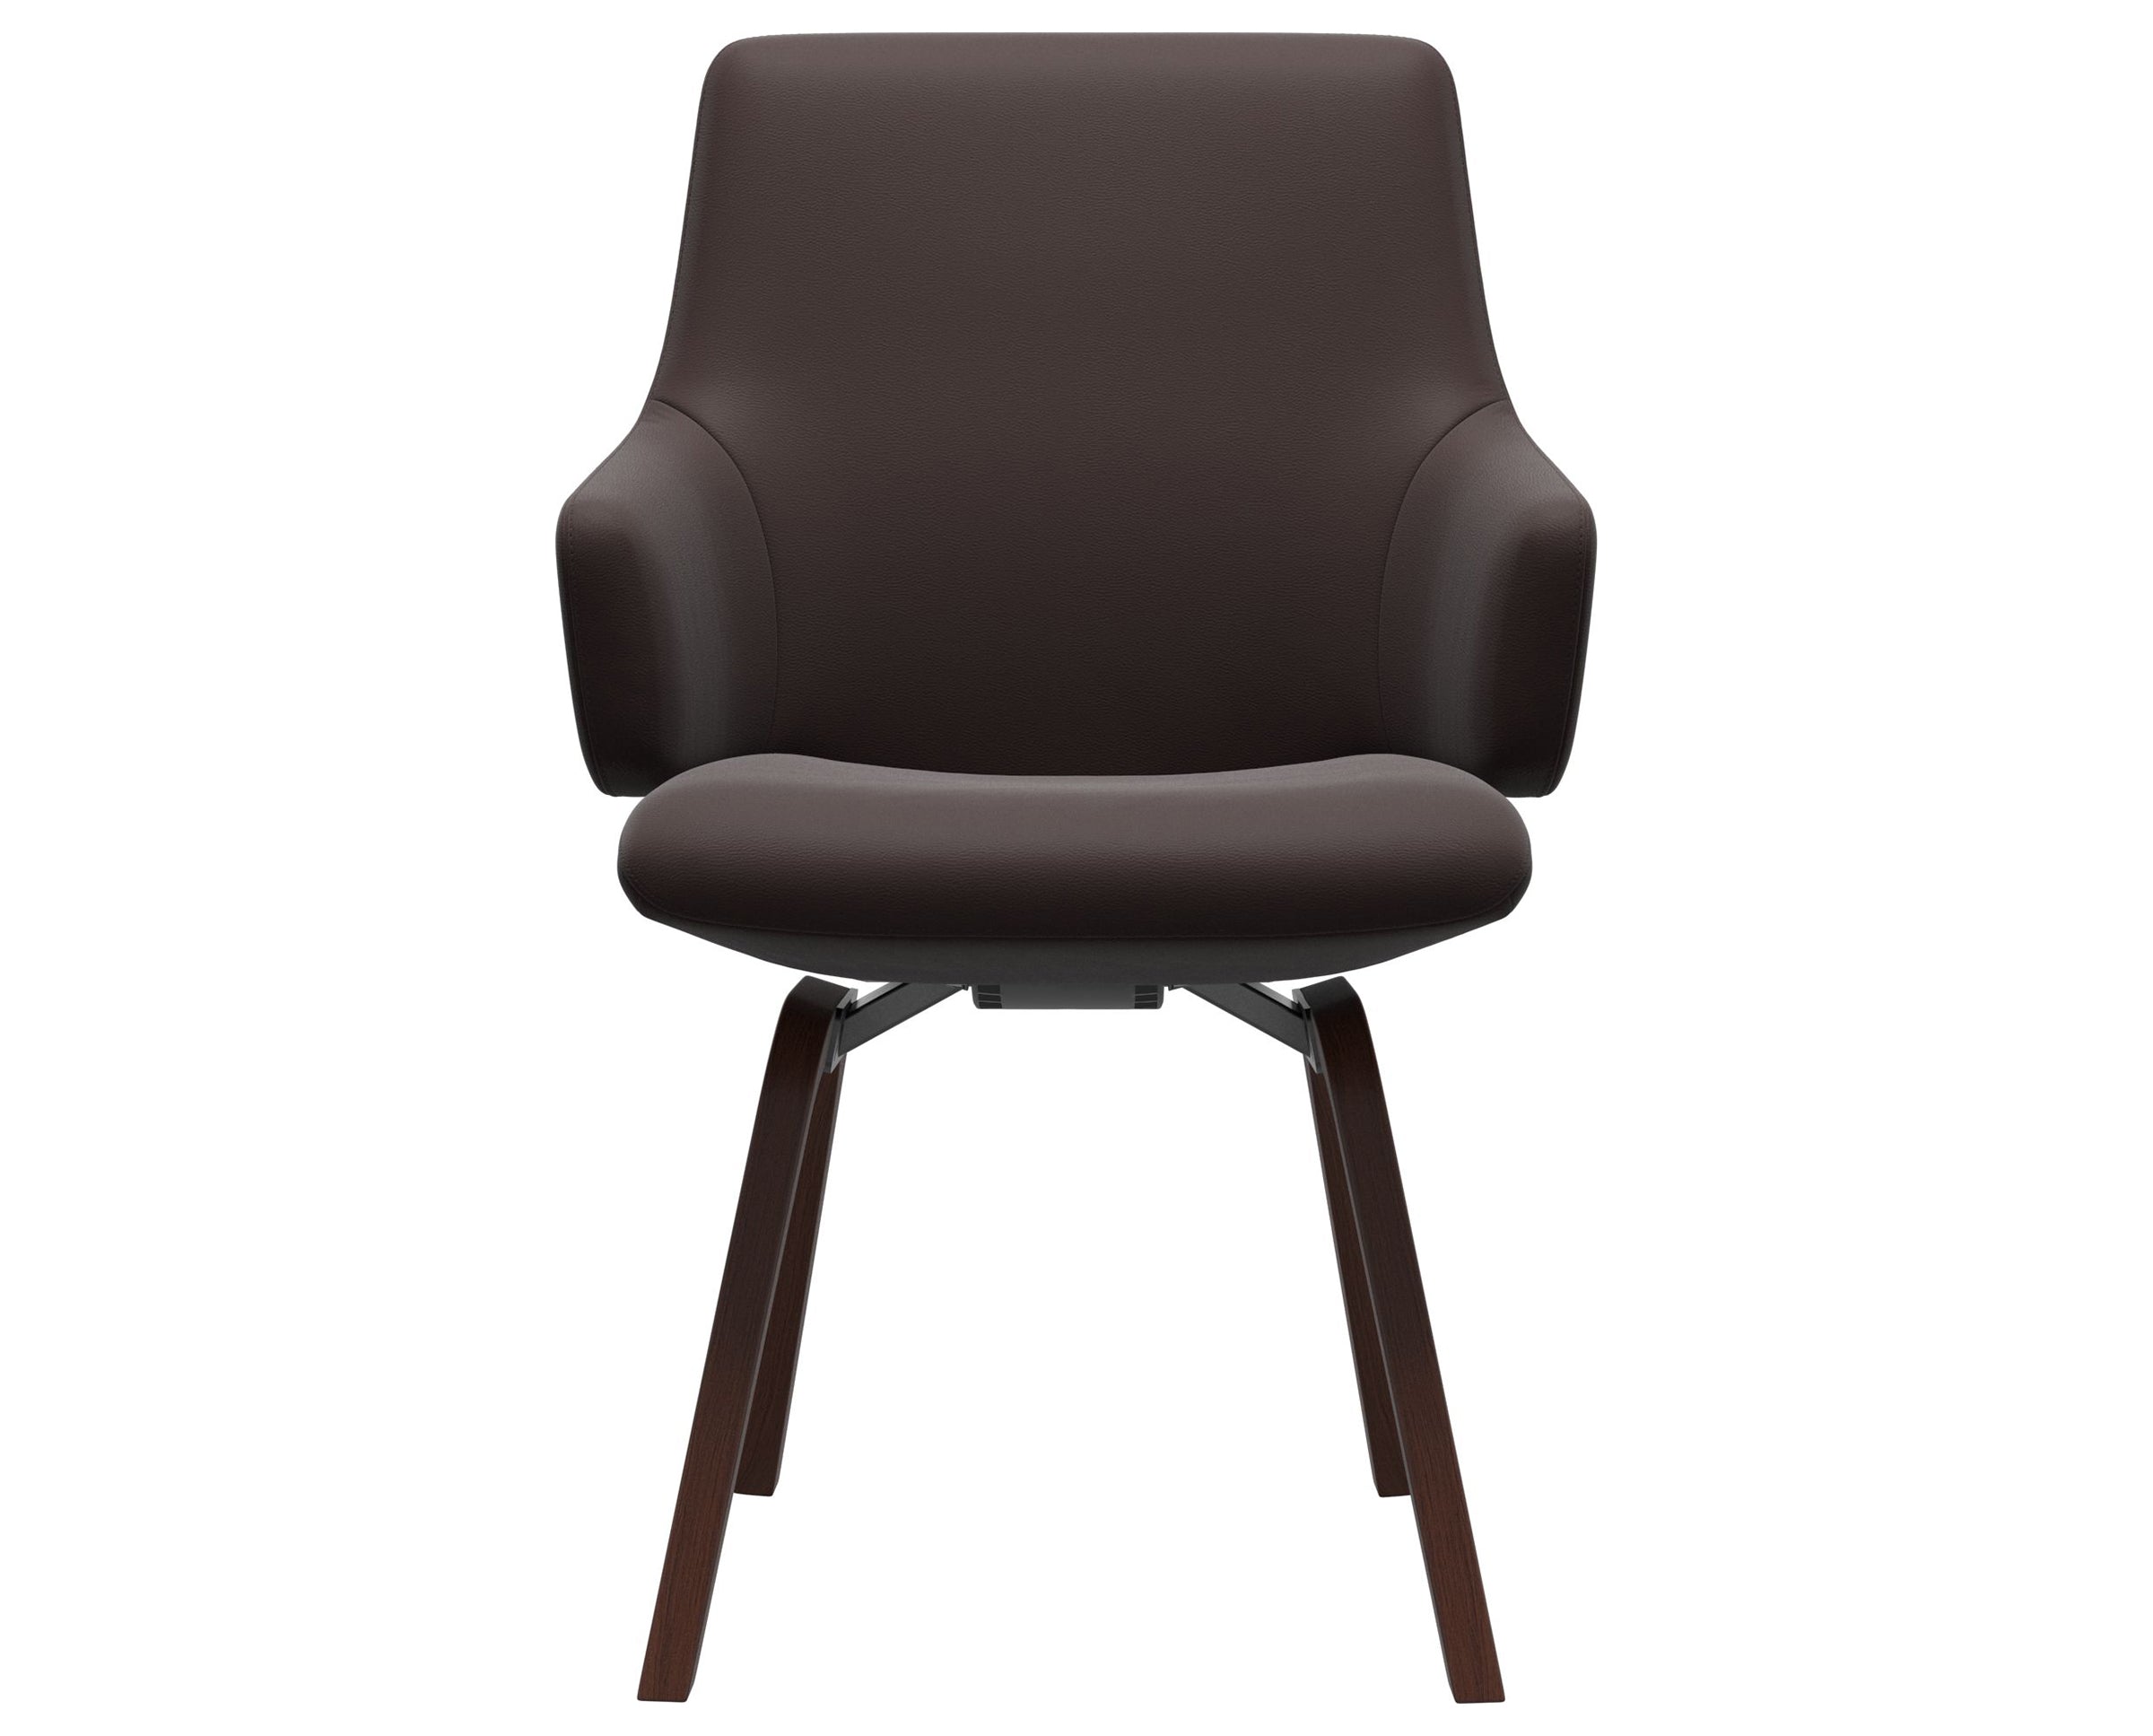 Paloma Leather Chocolate and Walnut Base | Stressless Laurel Low Back D200 Dining Chair w/Arms | Valley Ridge Furniture